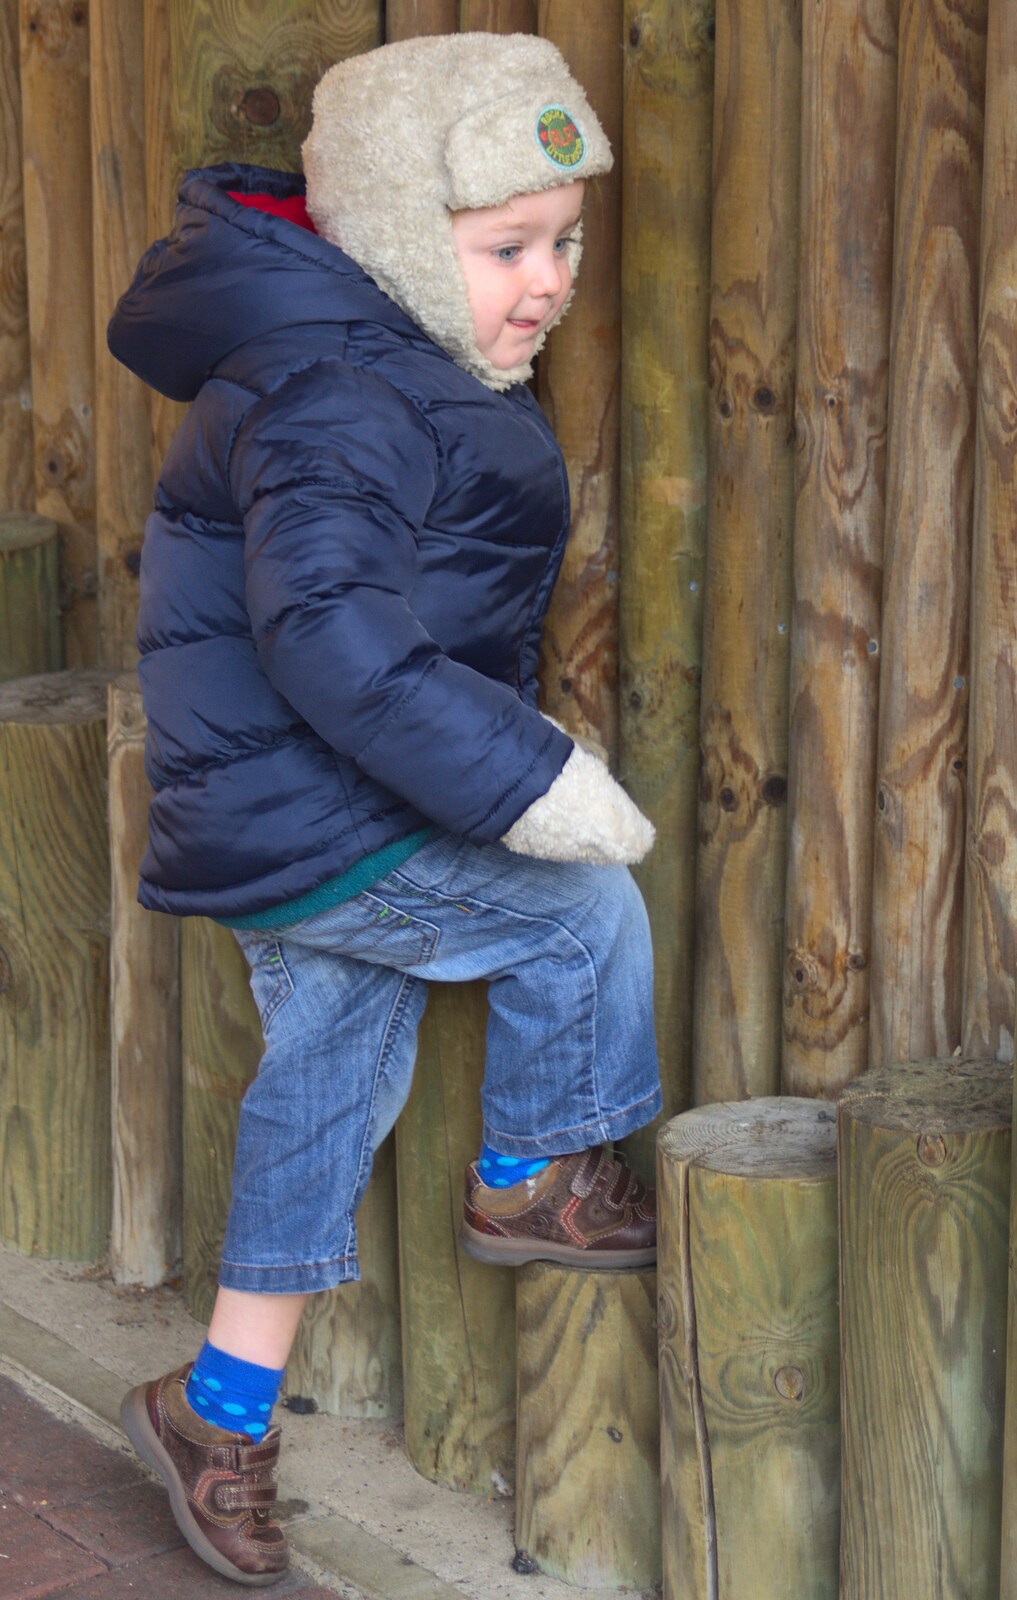 Fred climbs up on some logs from Trips to Banham Zoo and Norwich, Norfolk - 2nd January 2012